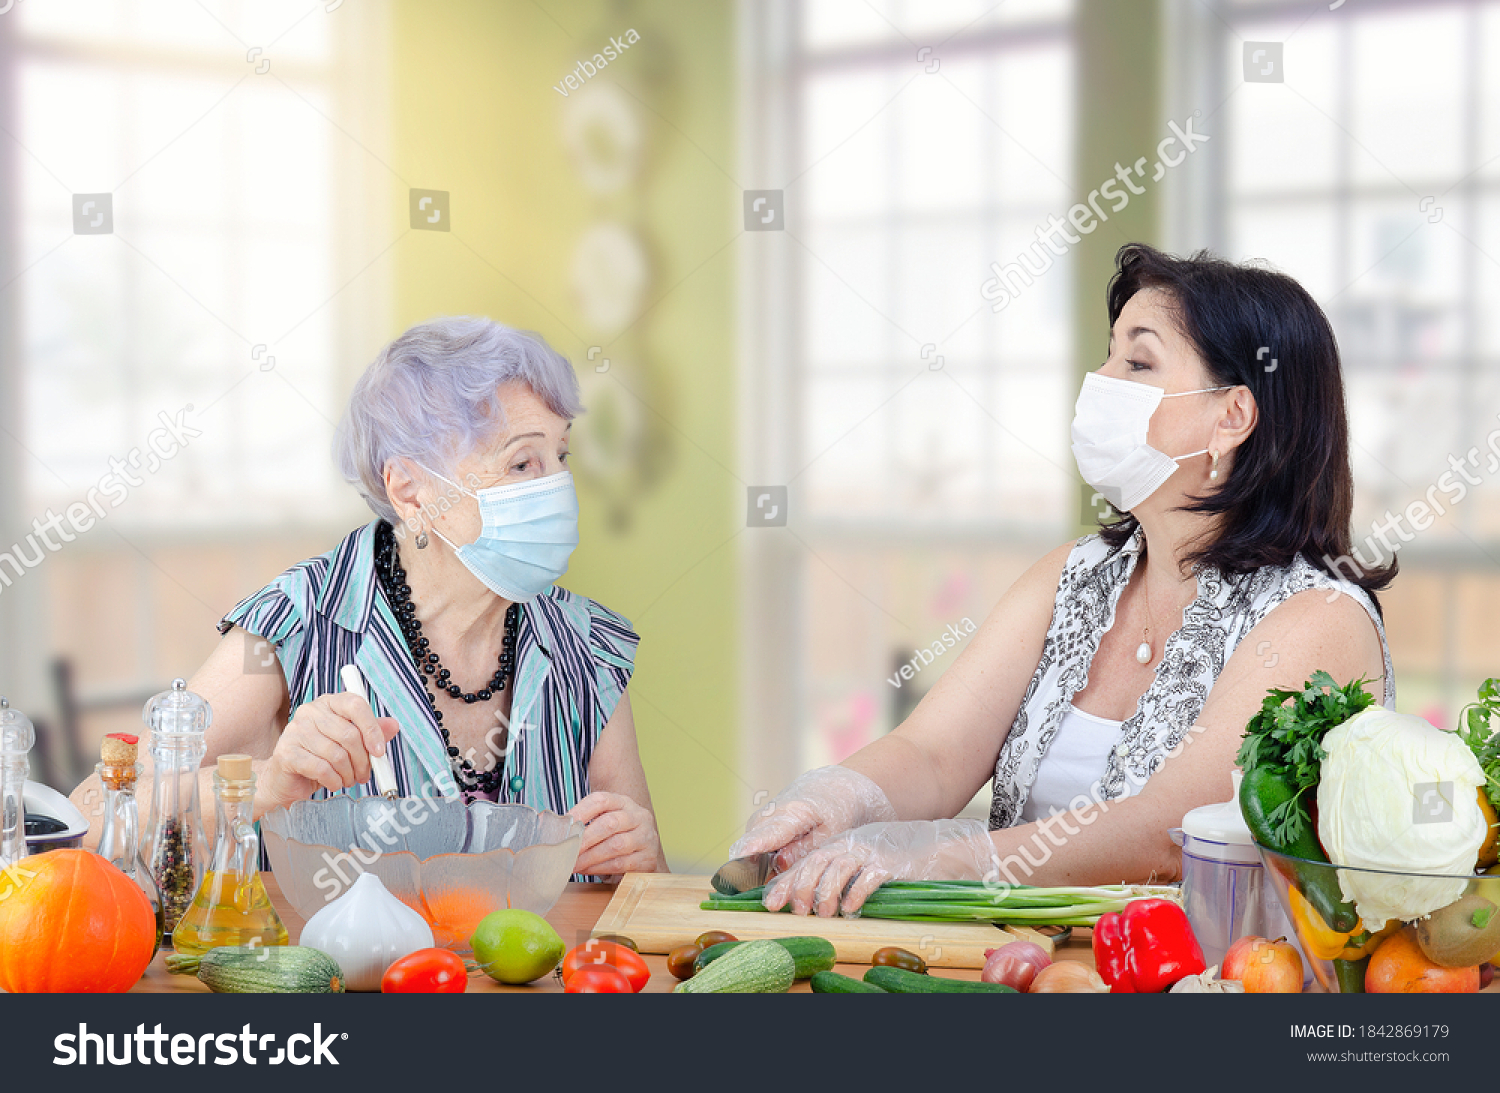 Caregiver or companion and senior adult woman speak in a friendly manner as they cook a vegetable salad together. Both are wearing protective face masks due to the coronavirus pandemic now.  #1842869179